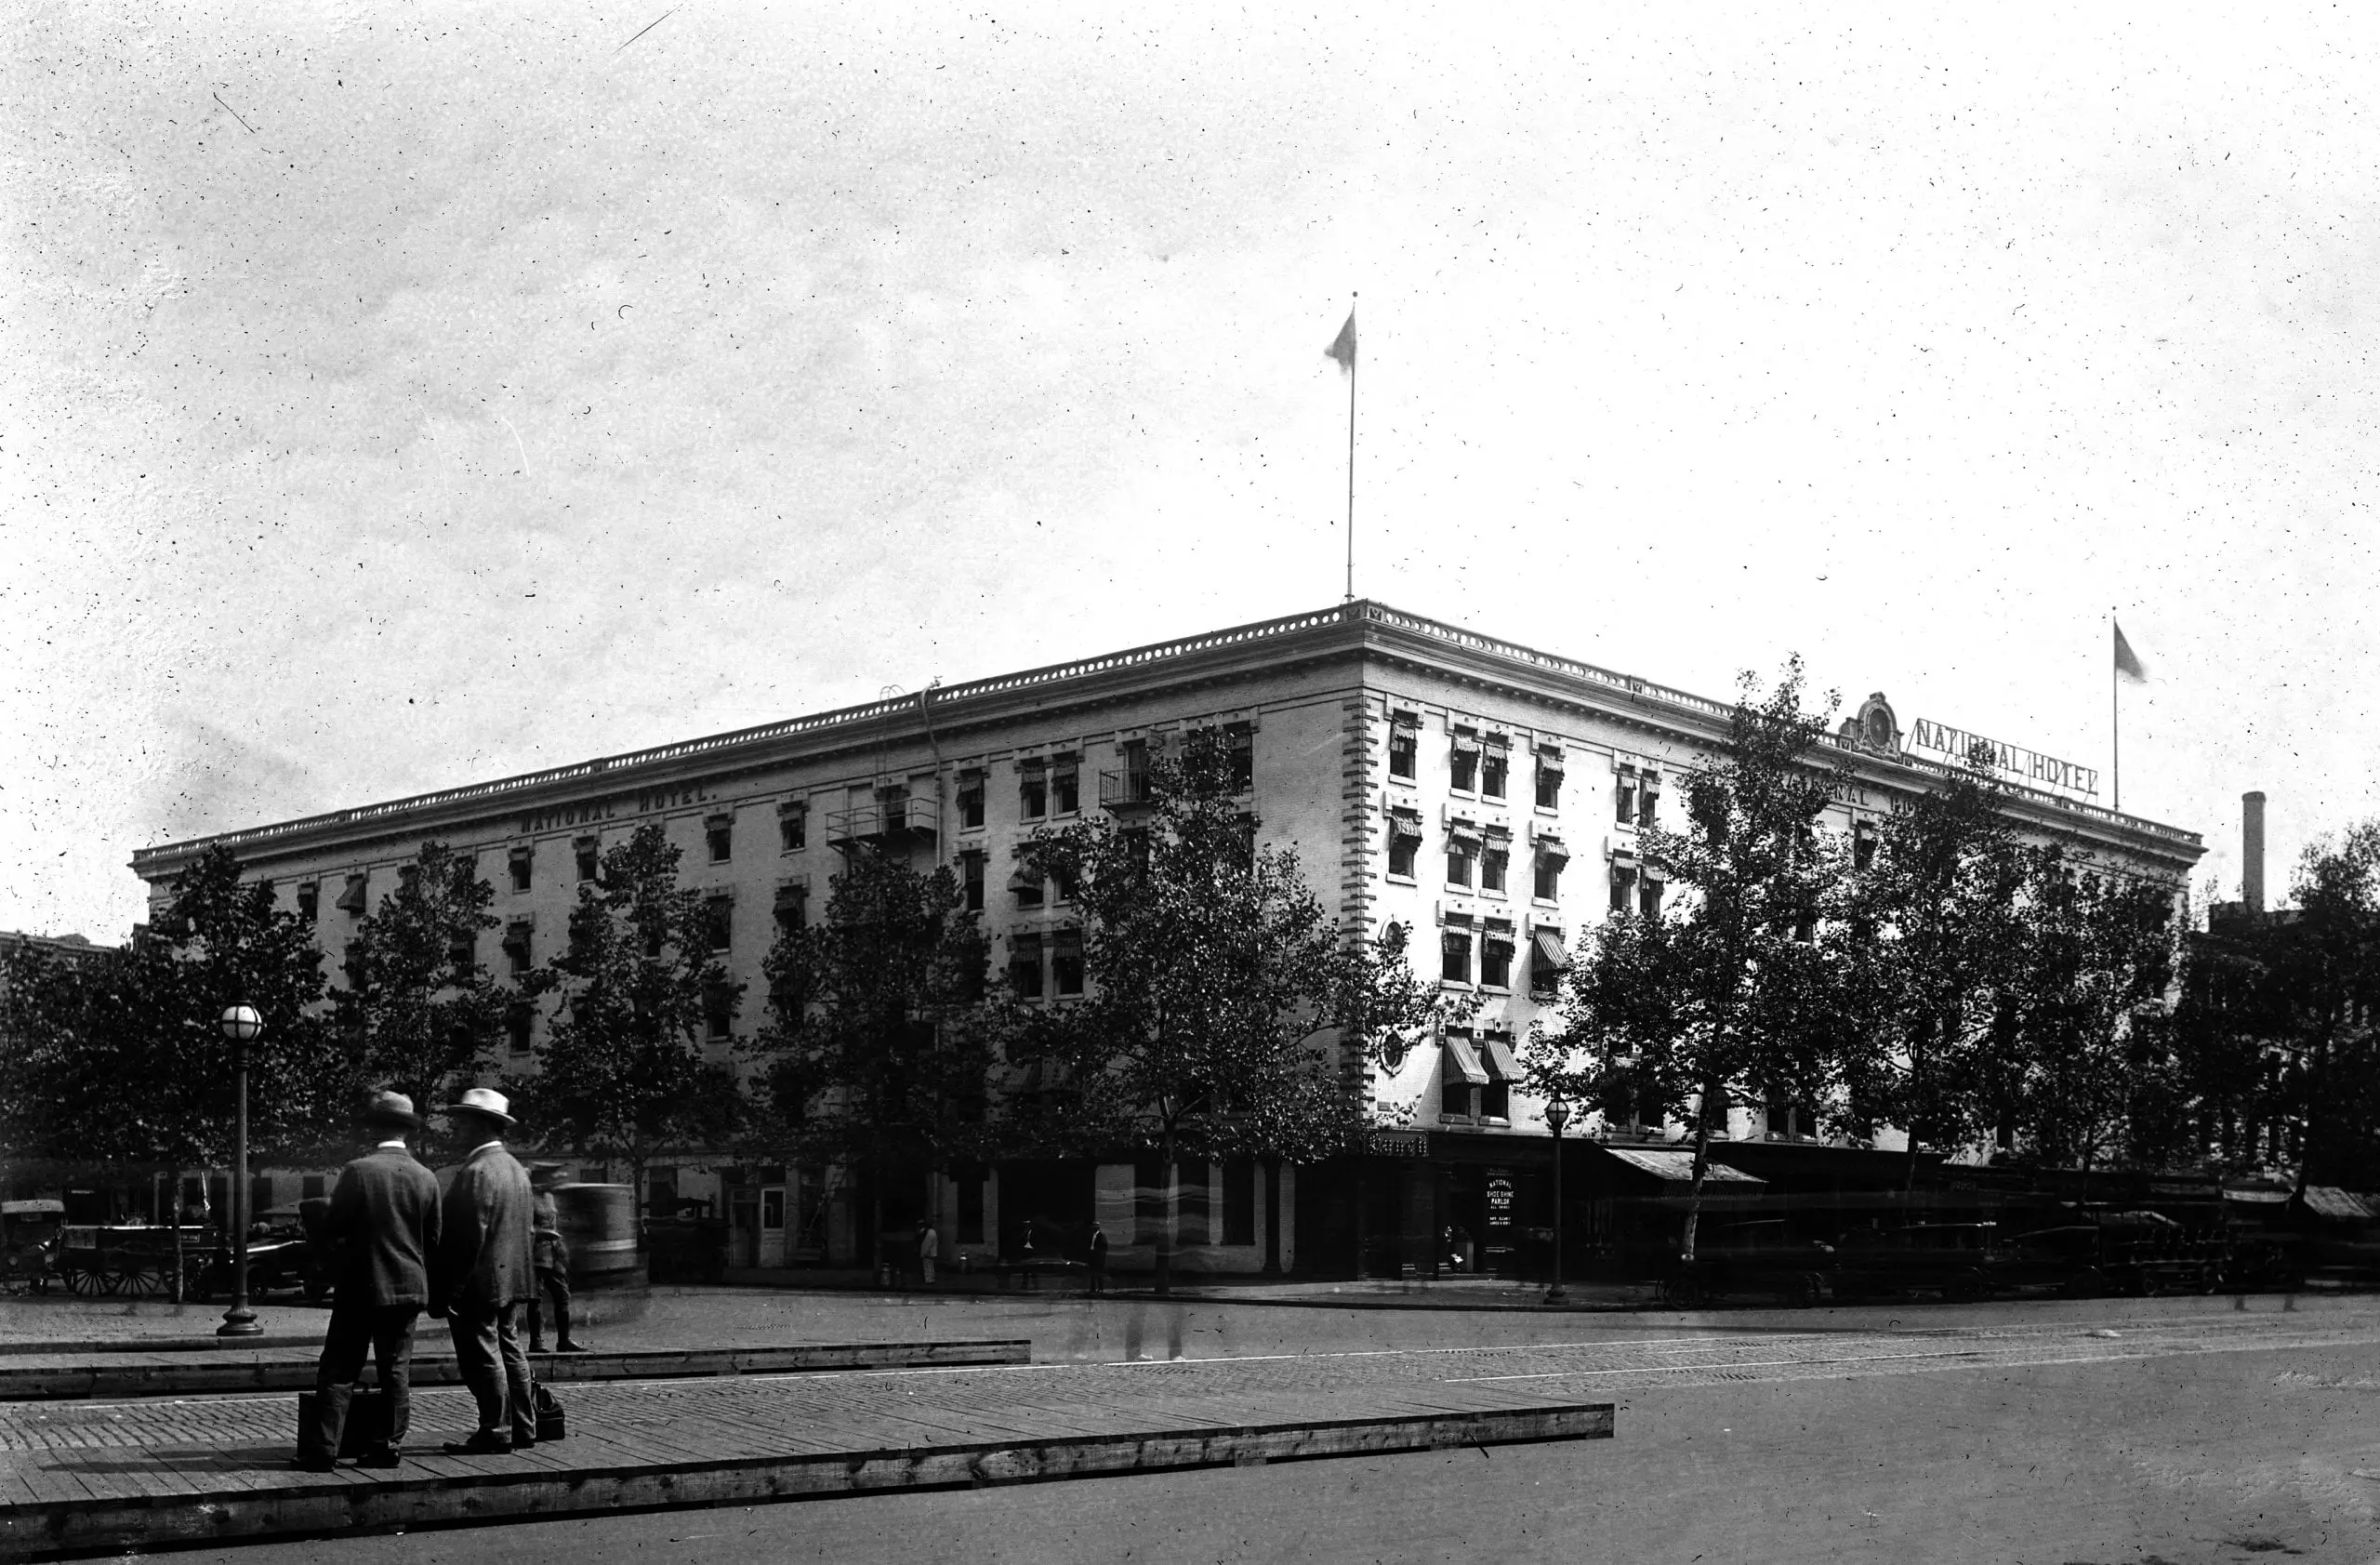 National Hotel in the 1920s